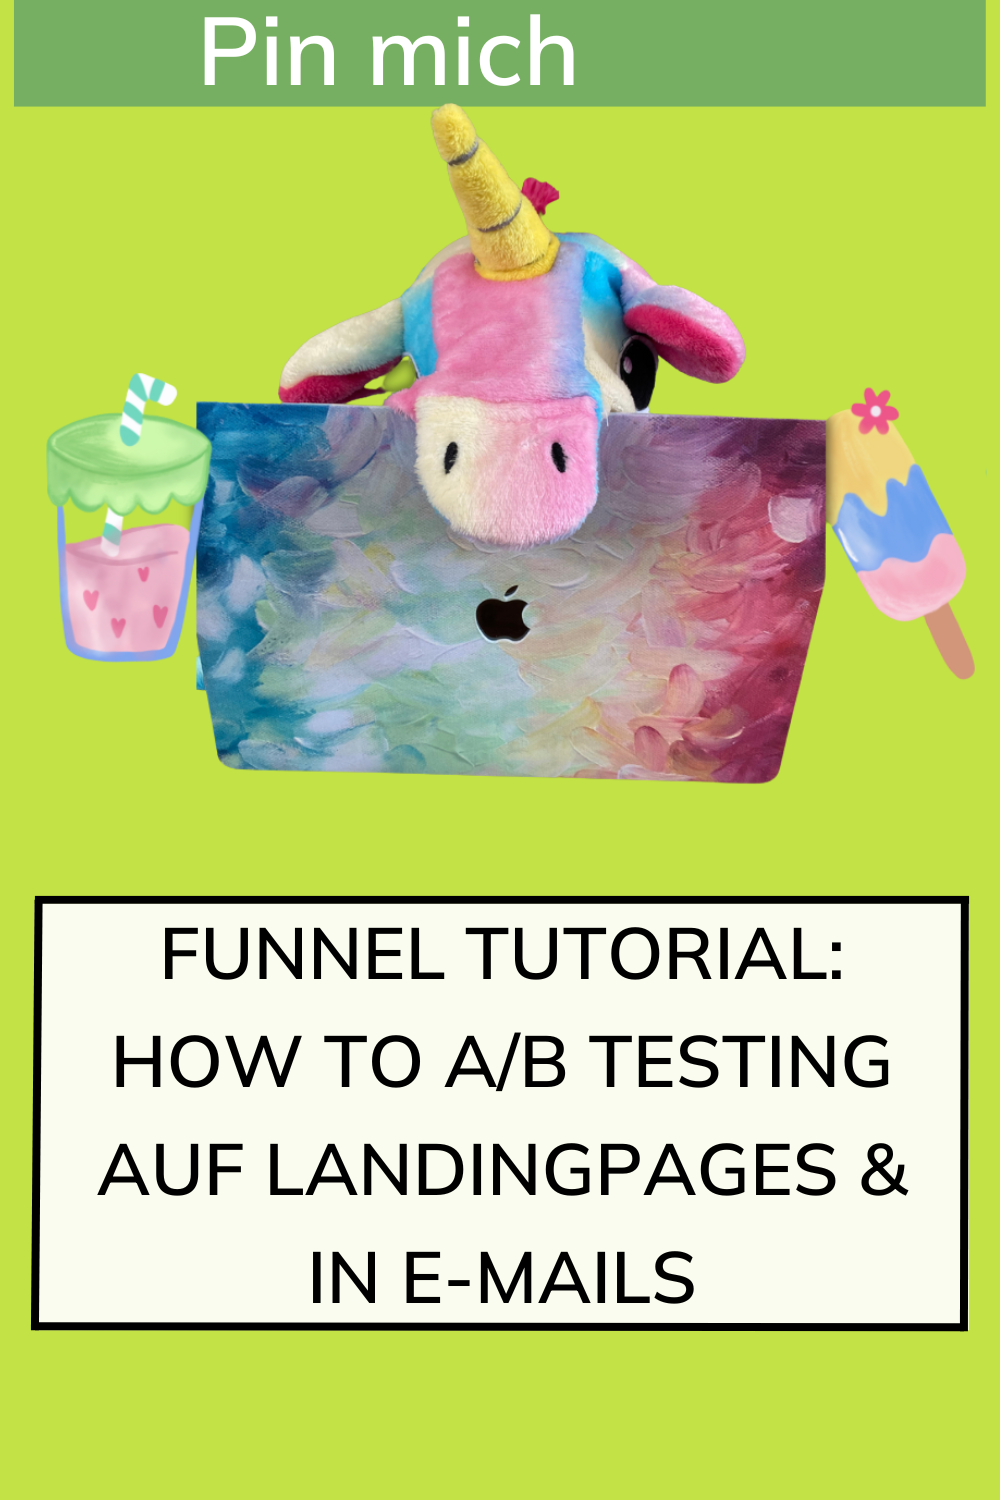 Funnel Anleitung A/B Tests auf Landingpages & in e-mails